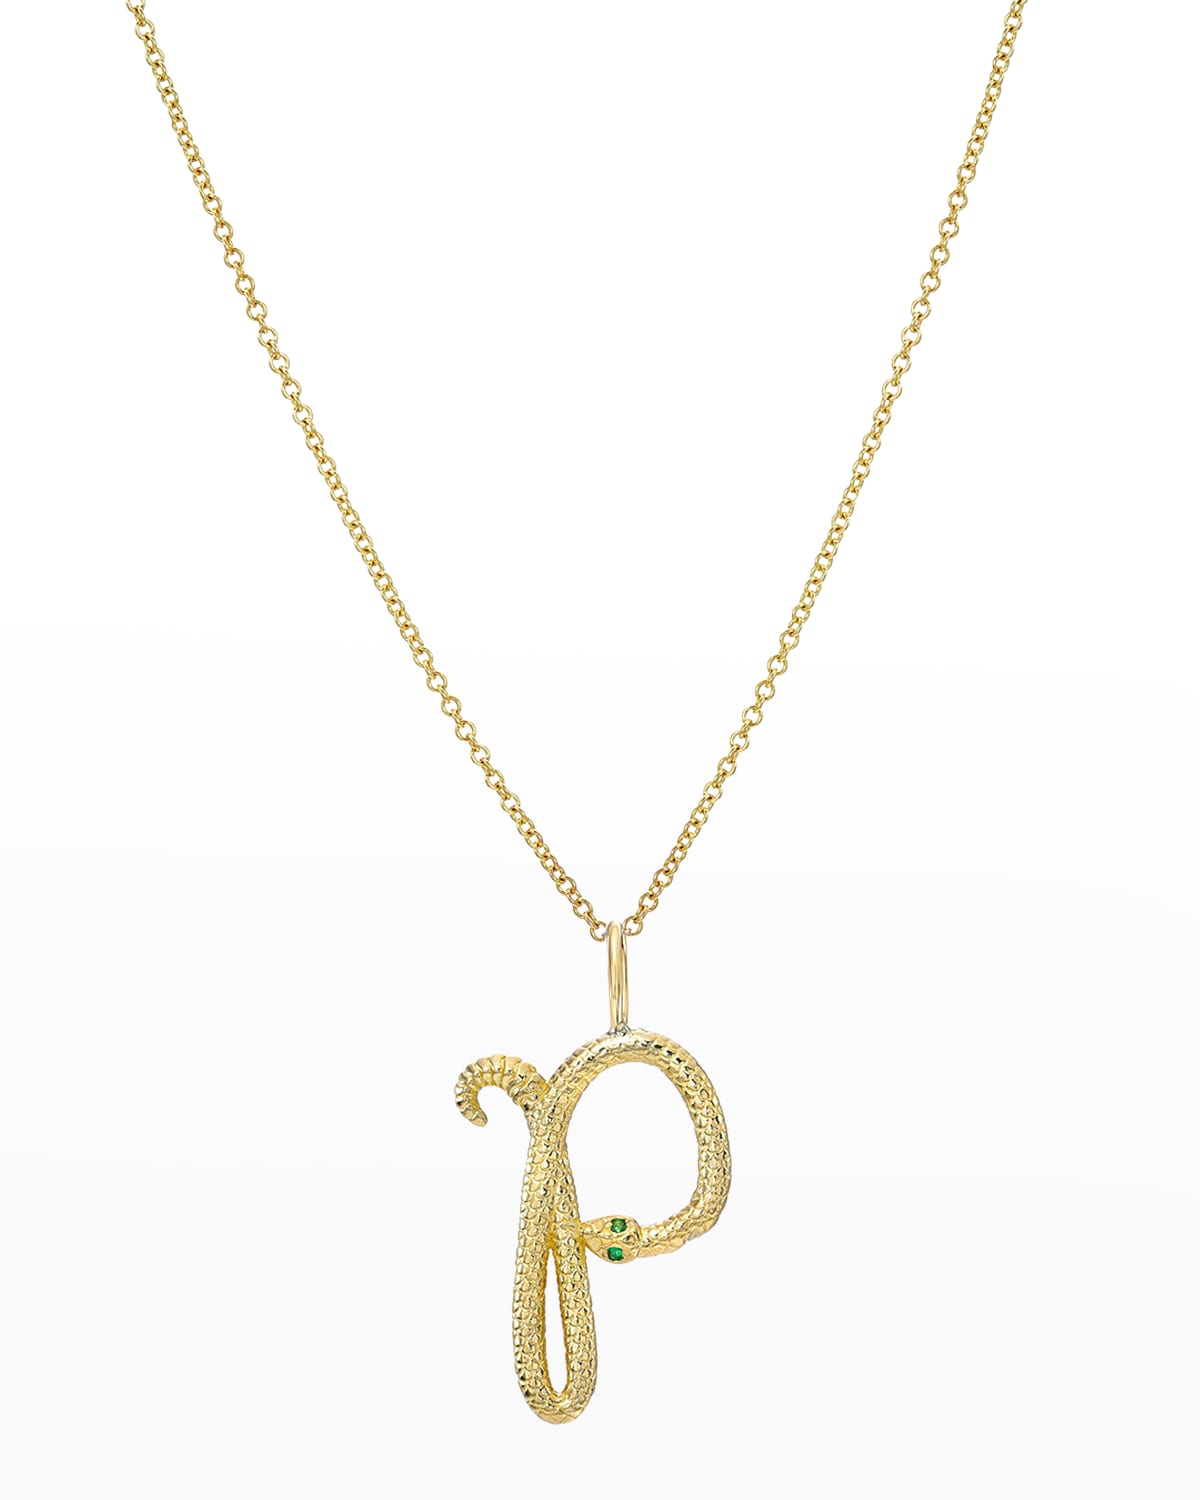 Zoe Lev Jewelry 14k Gold Snake Initial Necklace In P